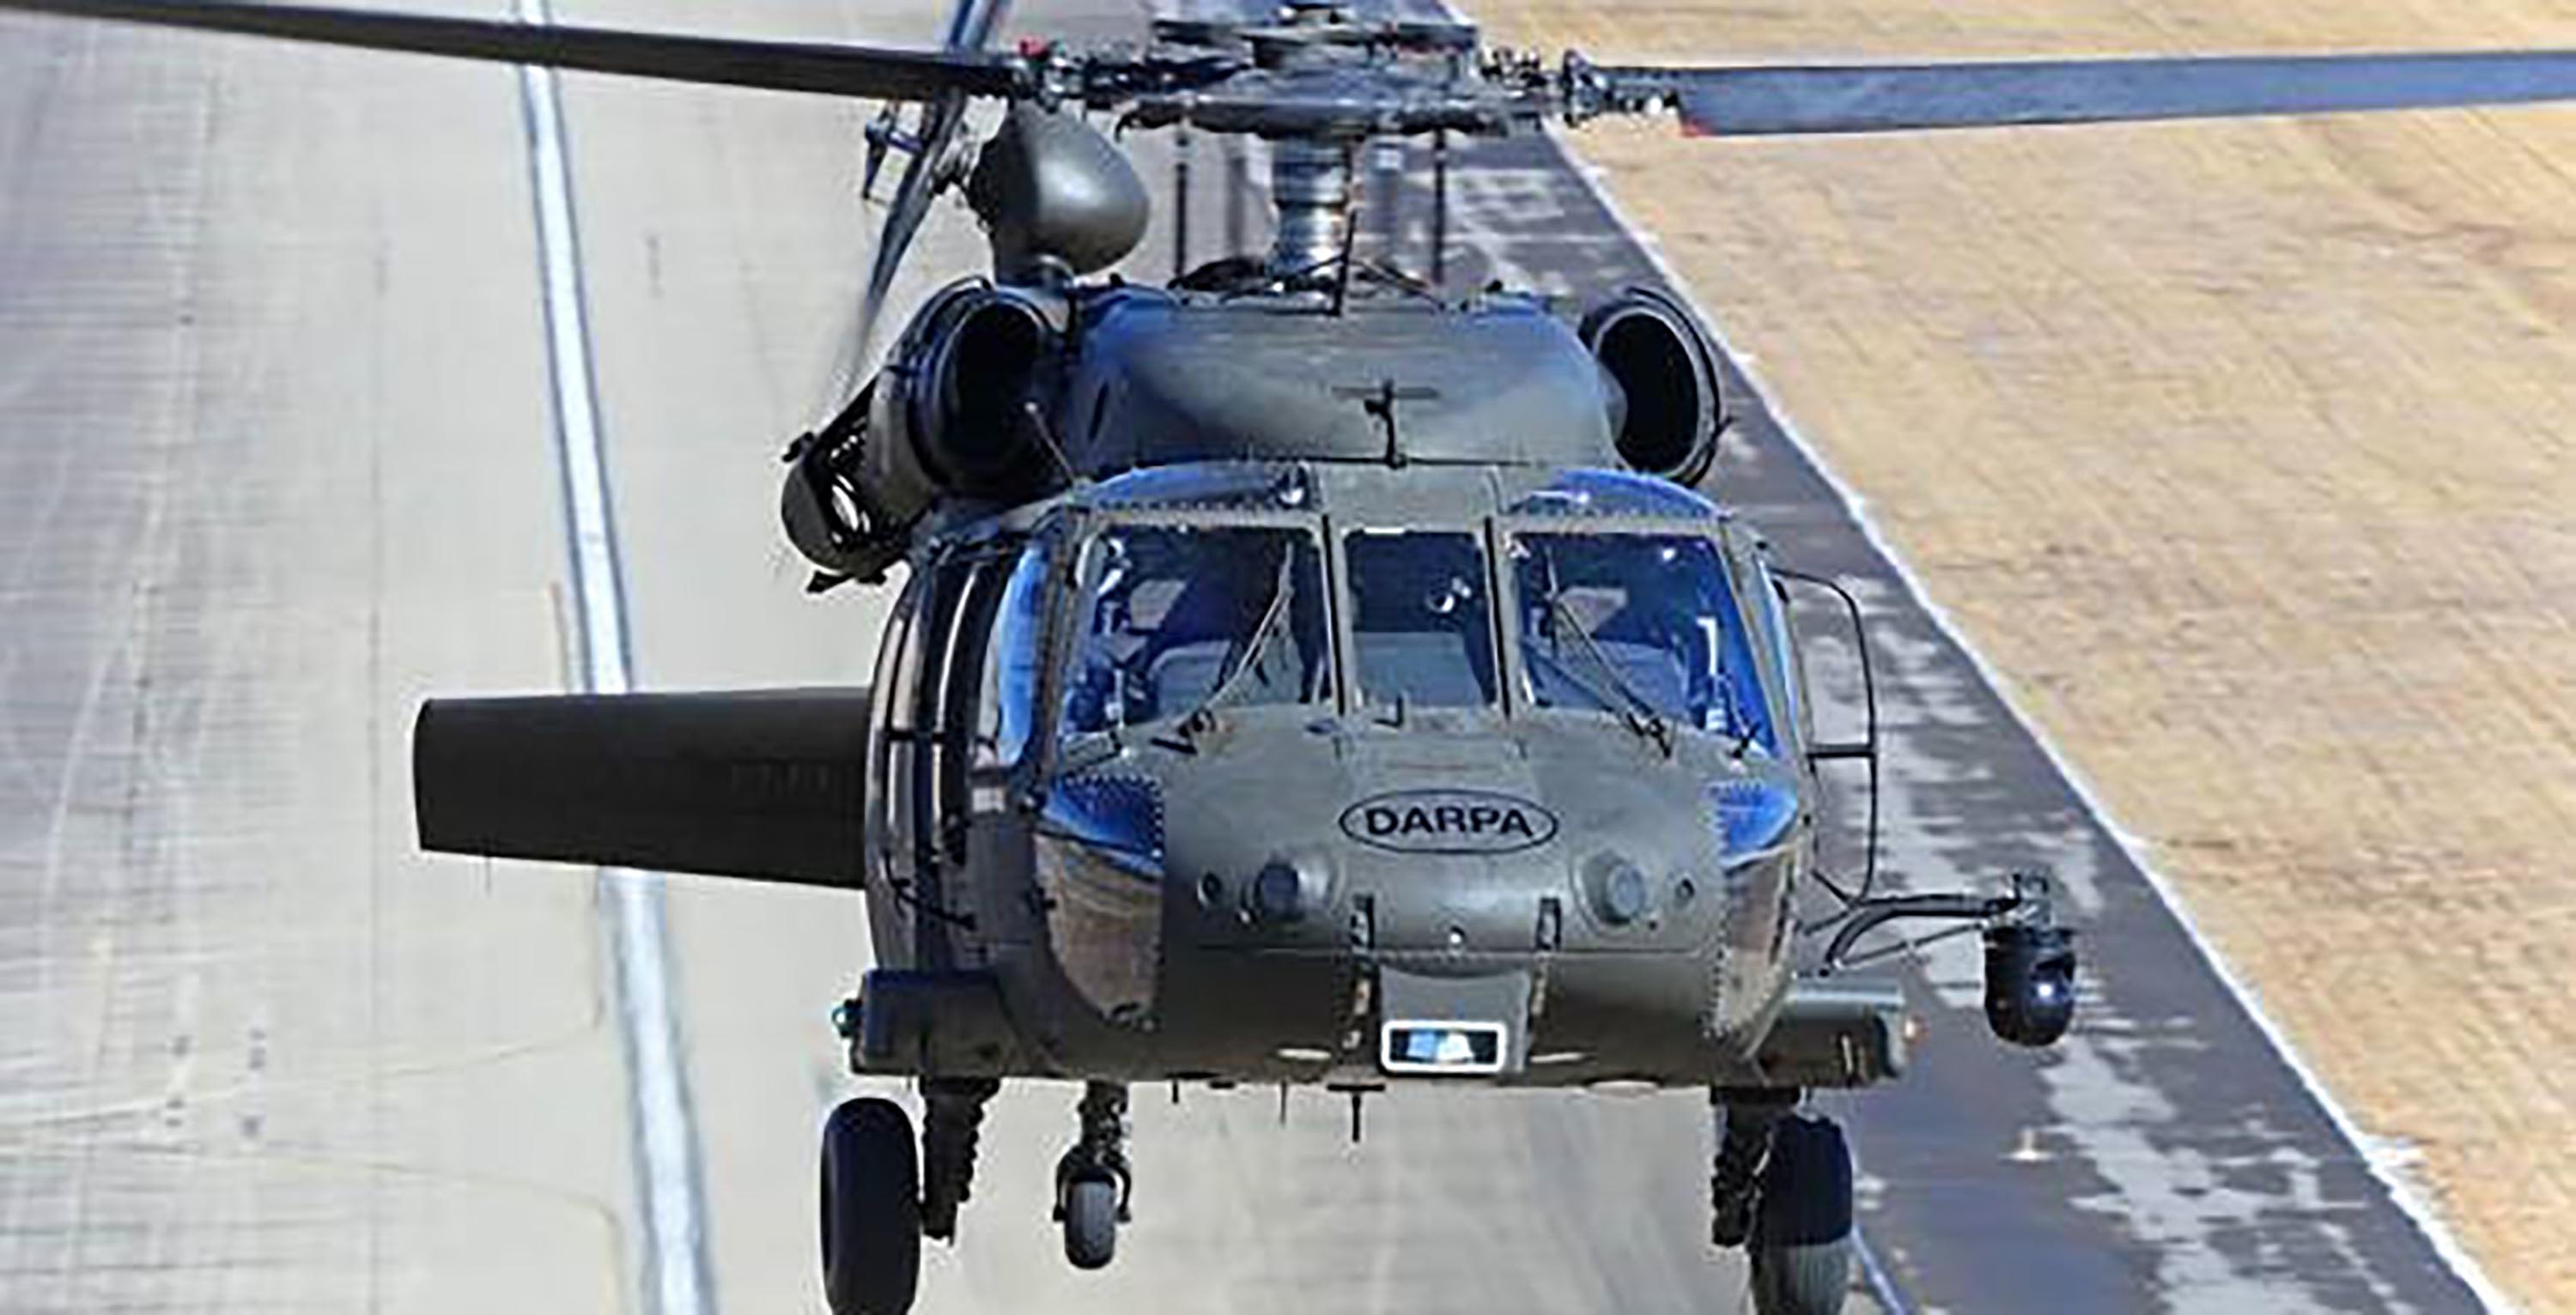 military helicopter pictures